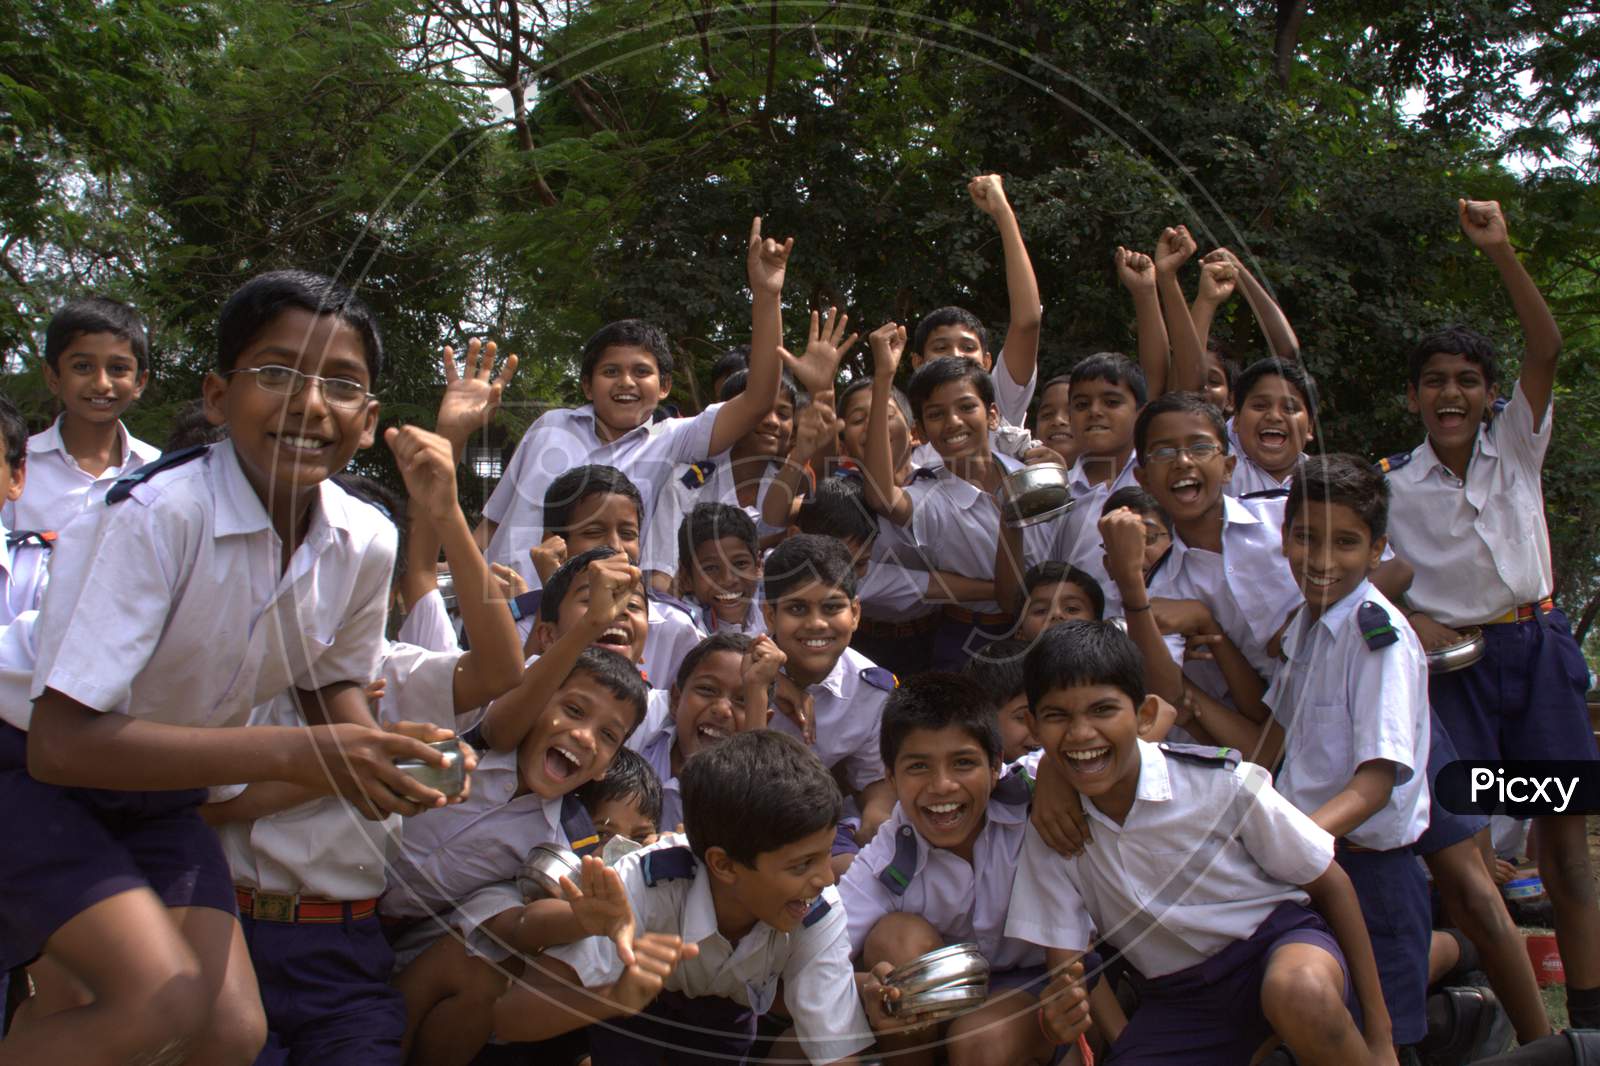 Group Of School Children With Smile Face And With Thumb Up Gesture